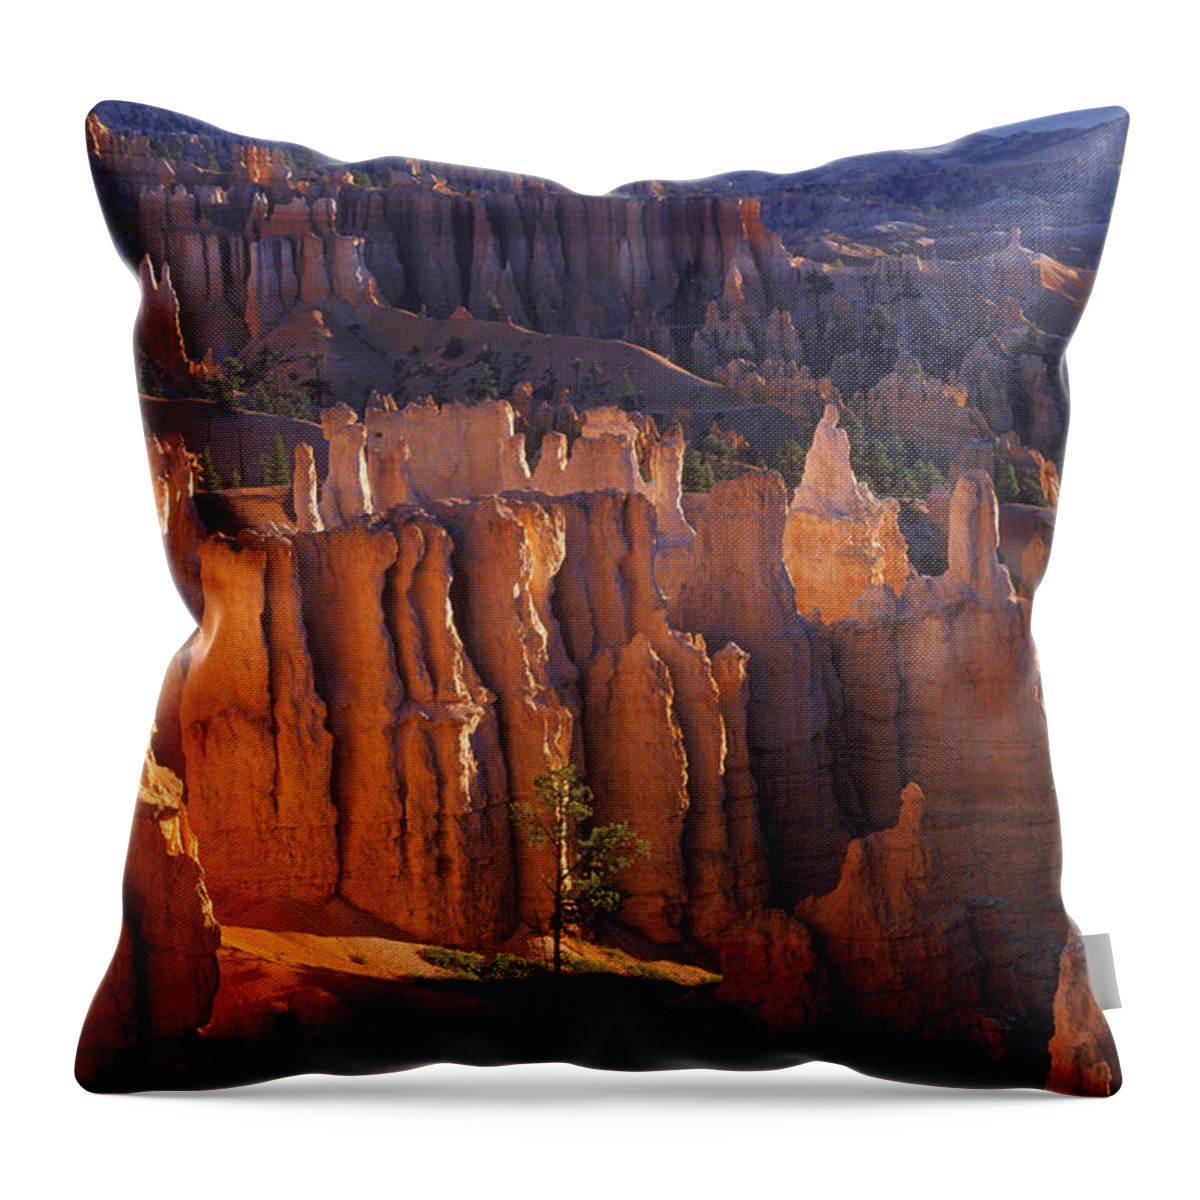 Architectural Column Throw Pillow featuring the photograph Steep Canyon With Tree In Front by Design Pics